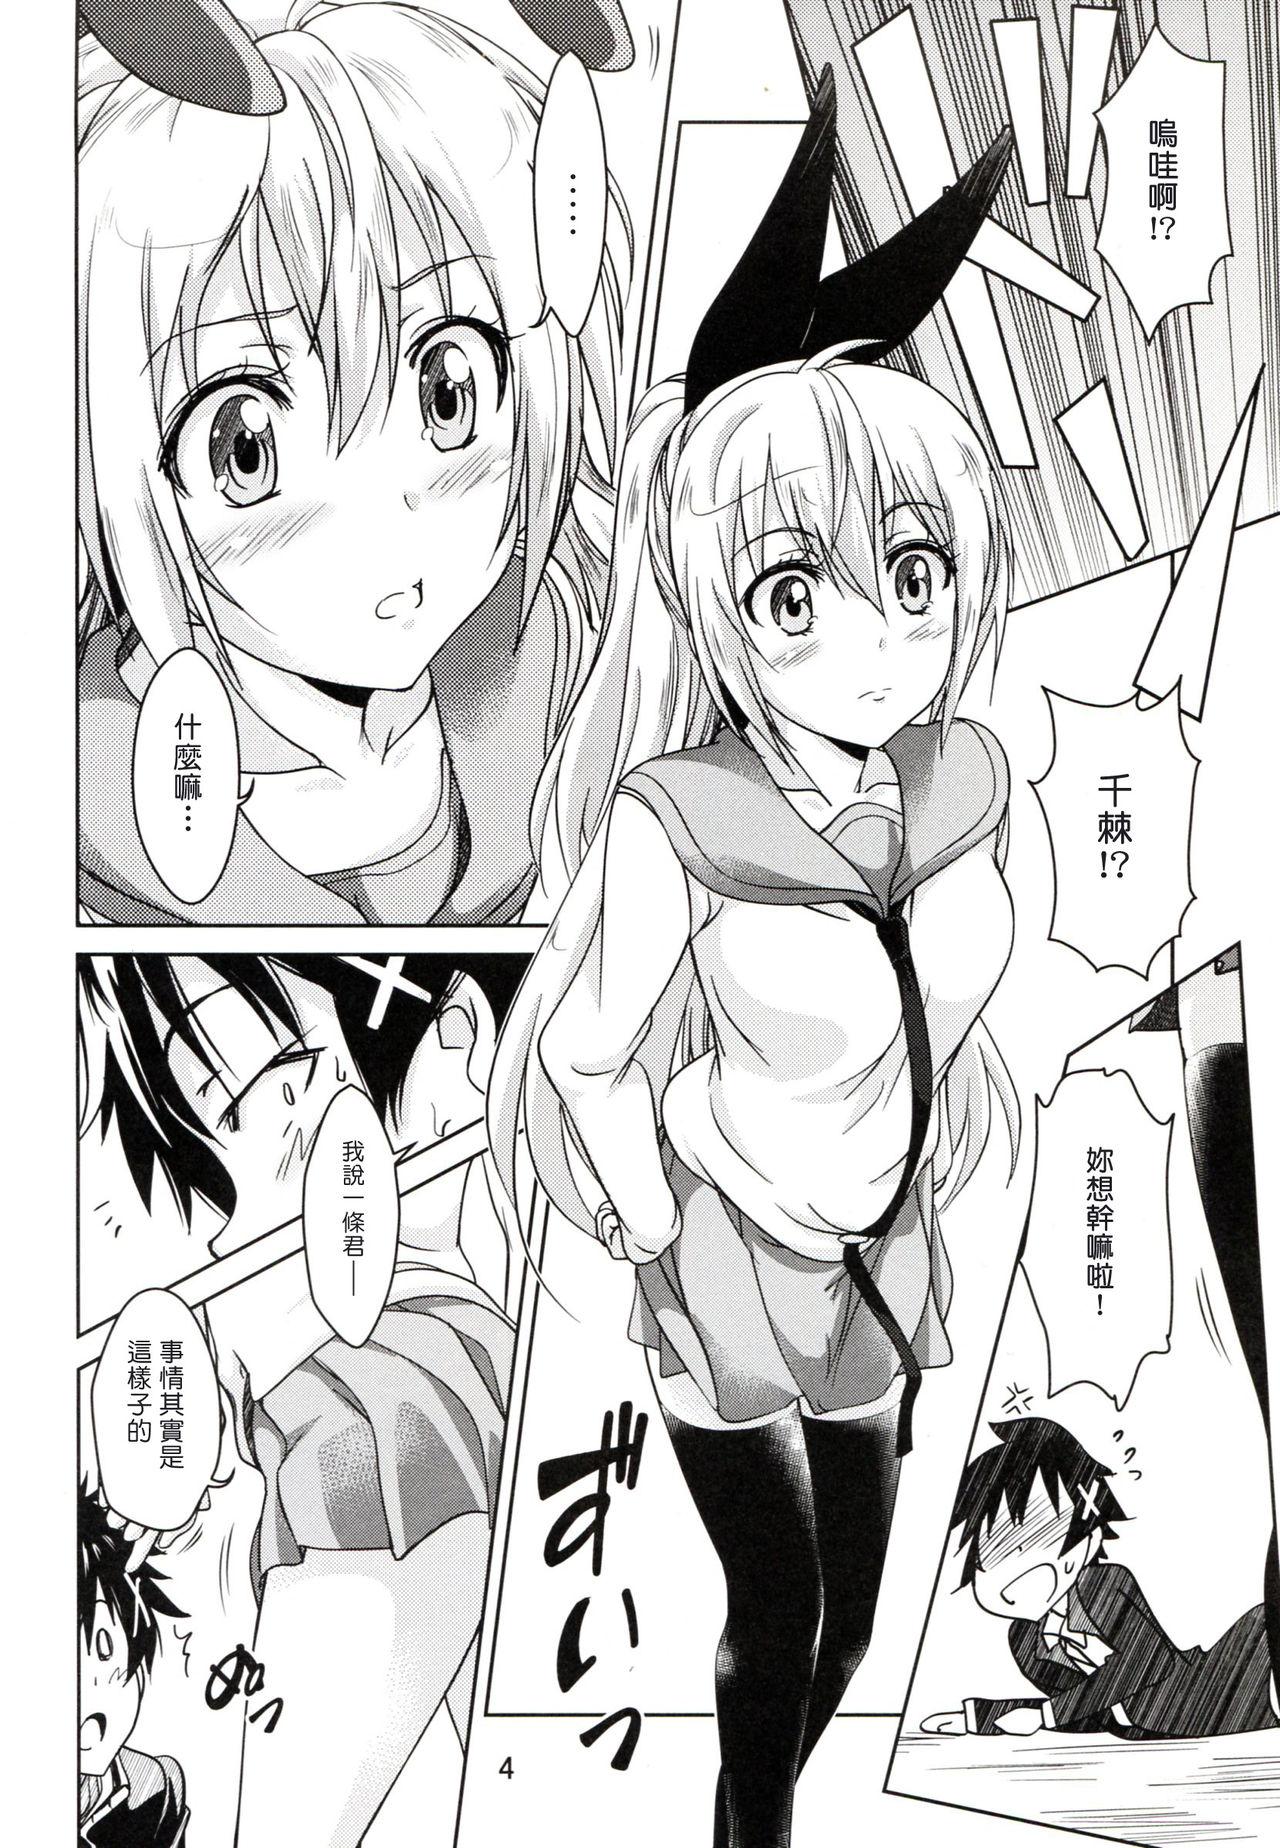 Freaky CLICK CLICK - Nisekoi Family Roleplay - Page 4